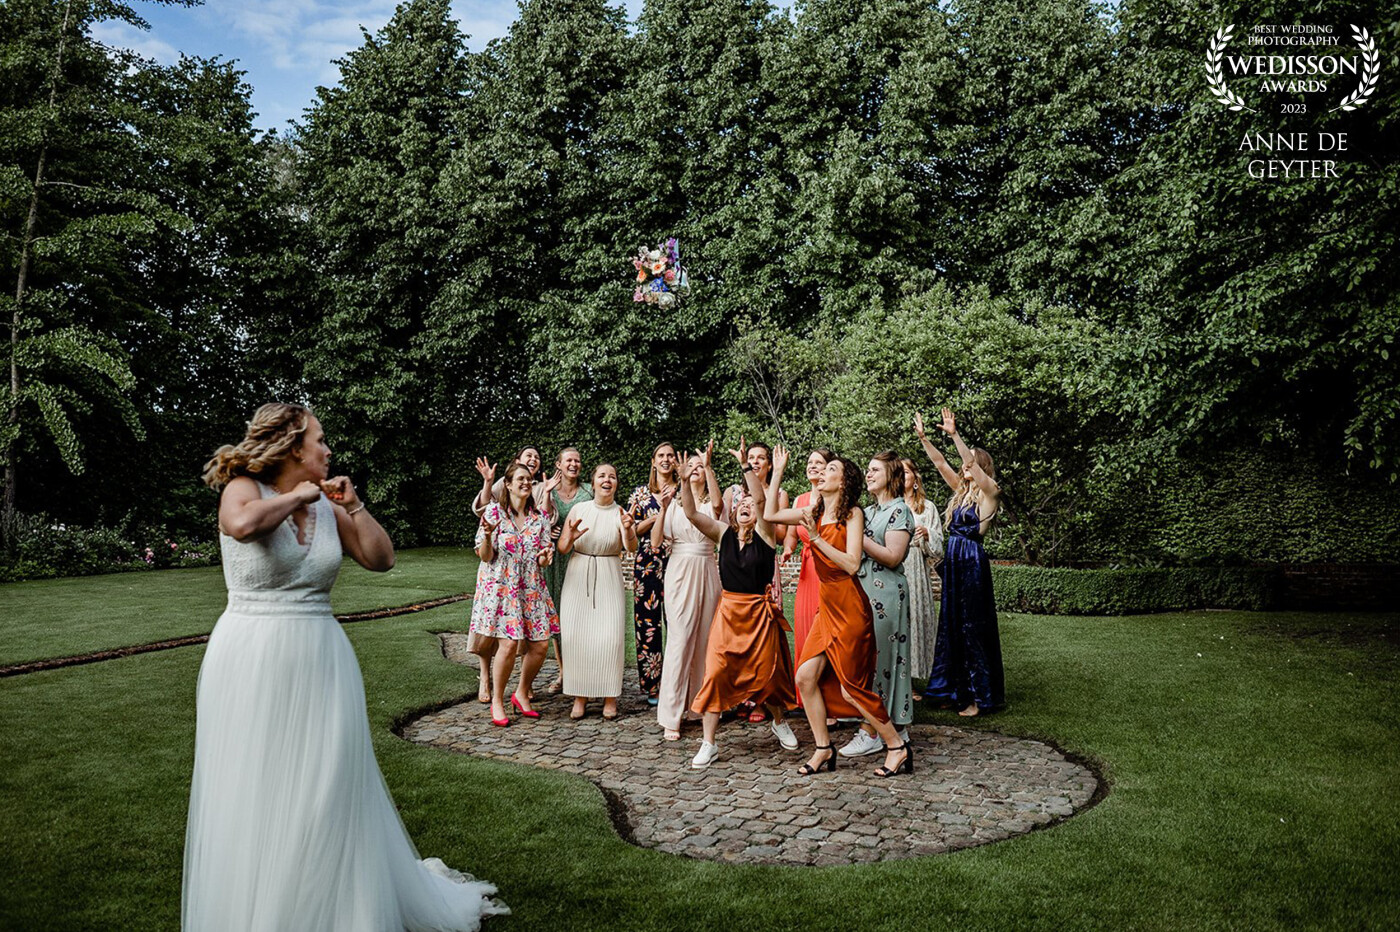 In my opinion, throwing a bouquet is always a lot of fun and a perfect icebreaker for fun group shots!